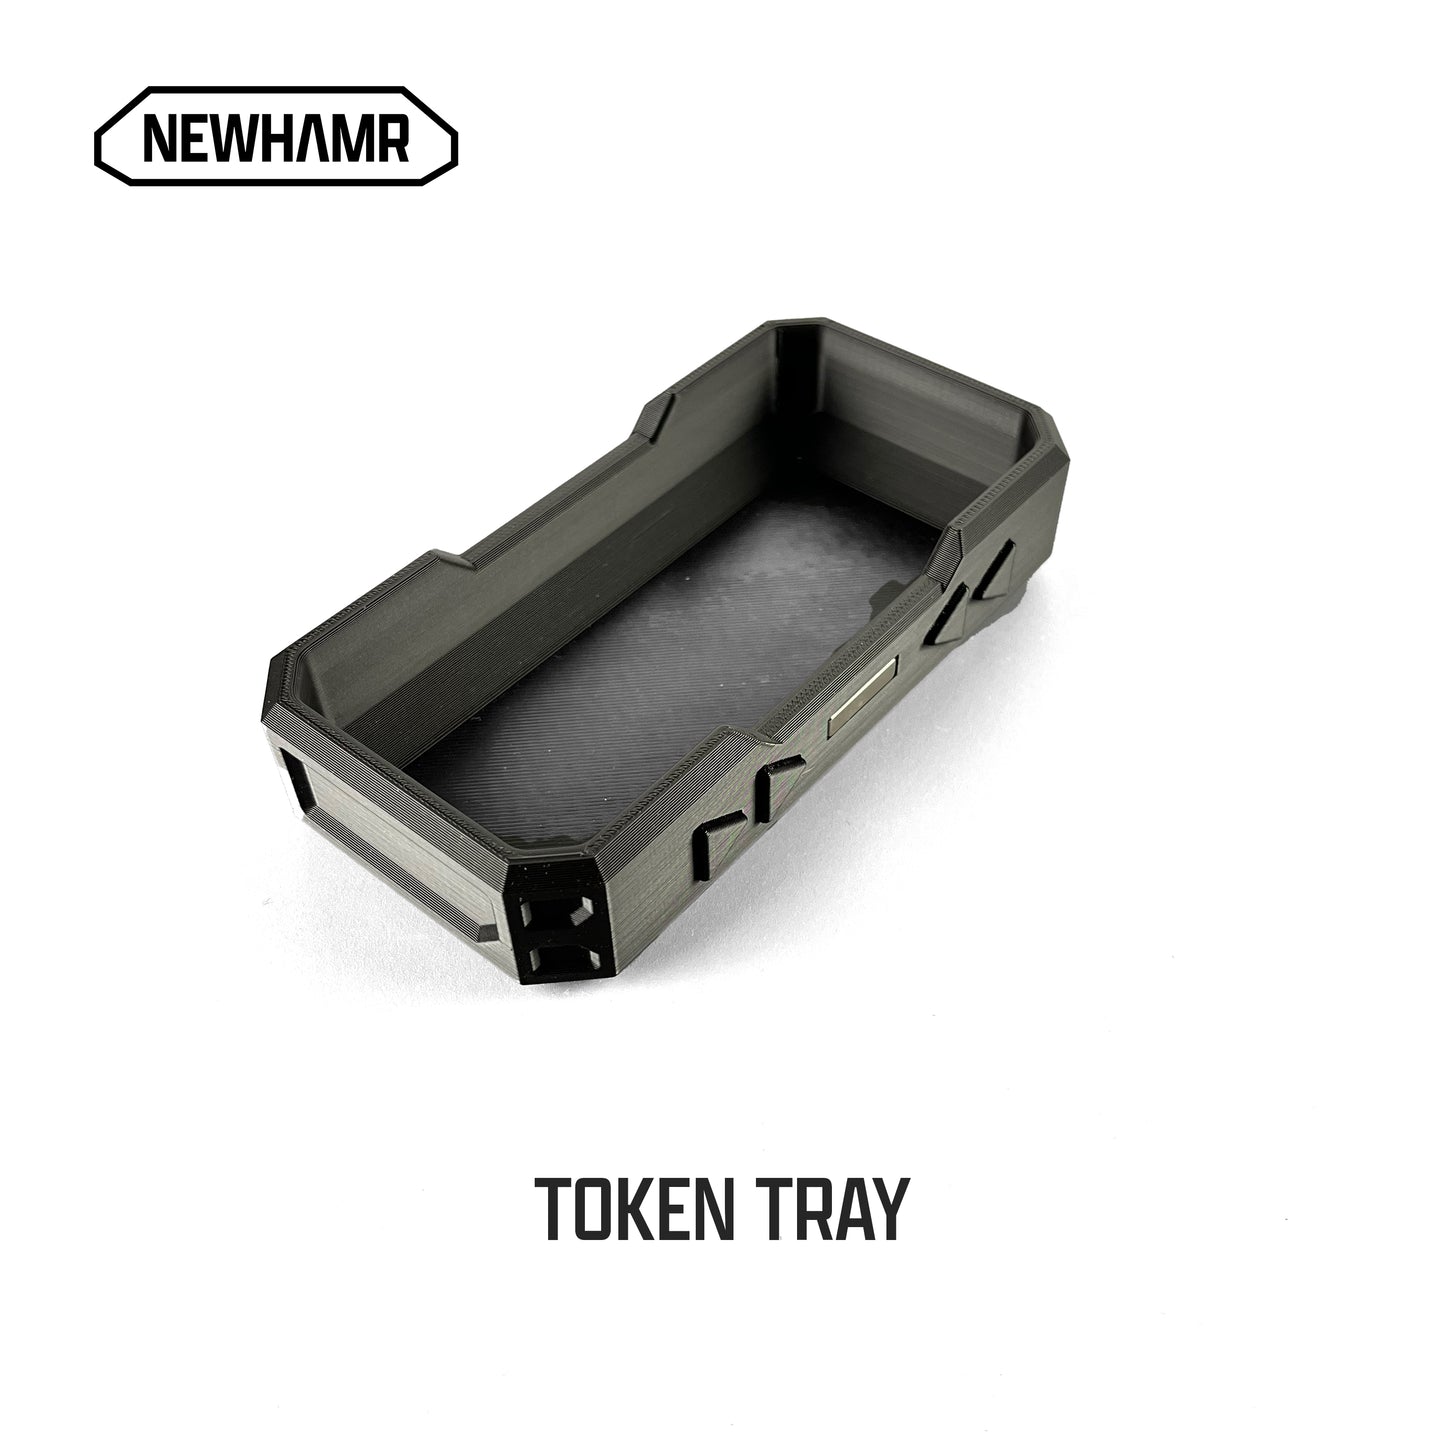 Titan Modular Dice Tray System for Tabletop Gaming